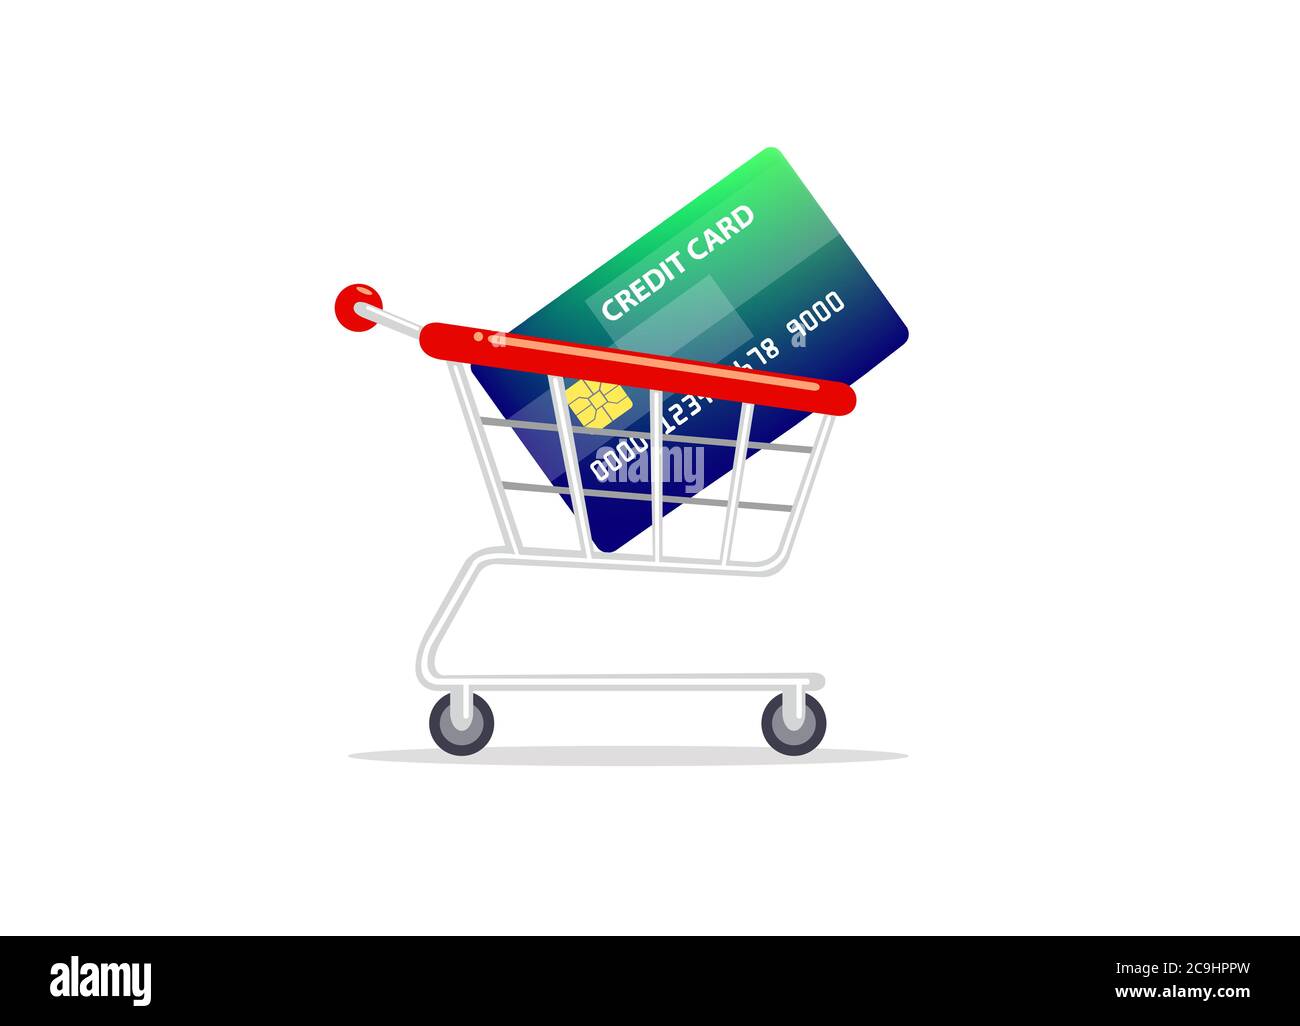 Shopping cart with credit card inside isolated on white background. Stock Vector